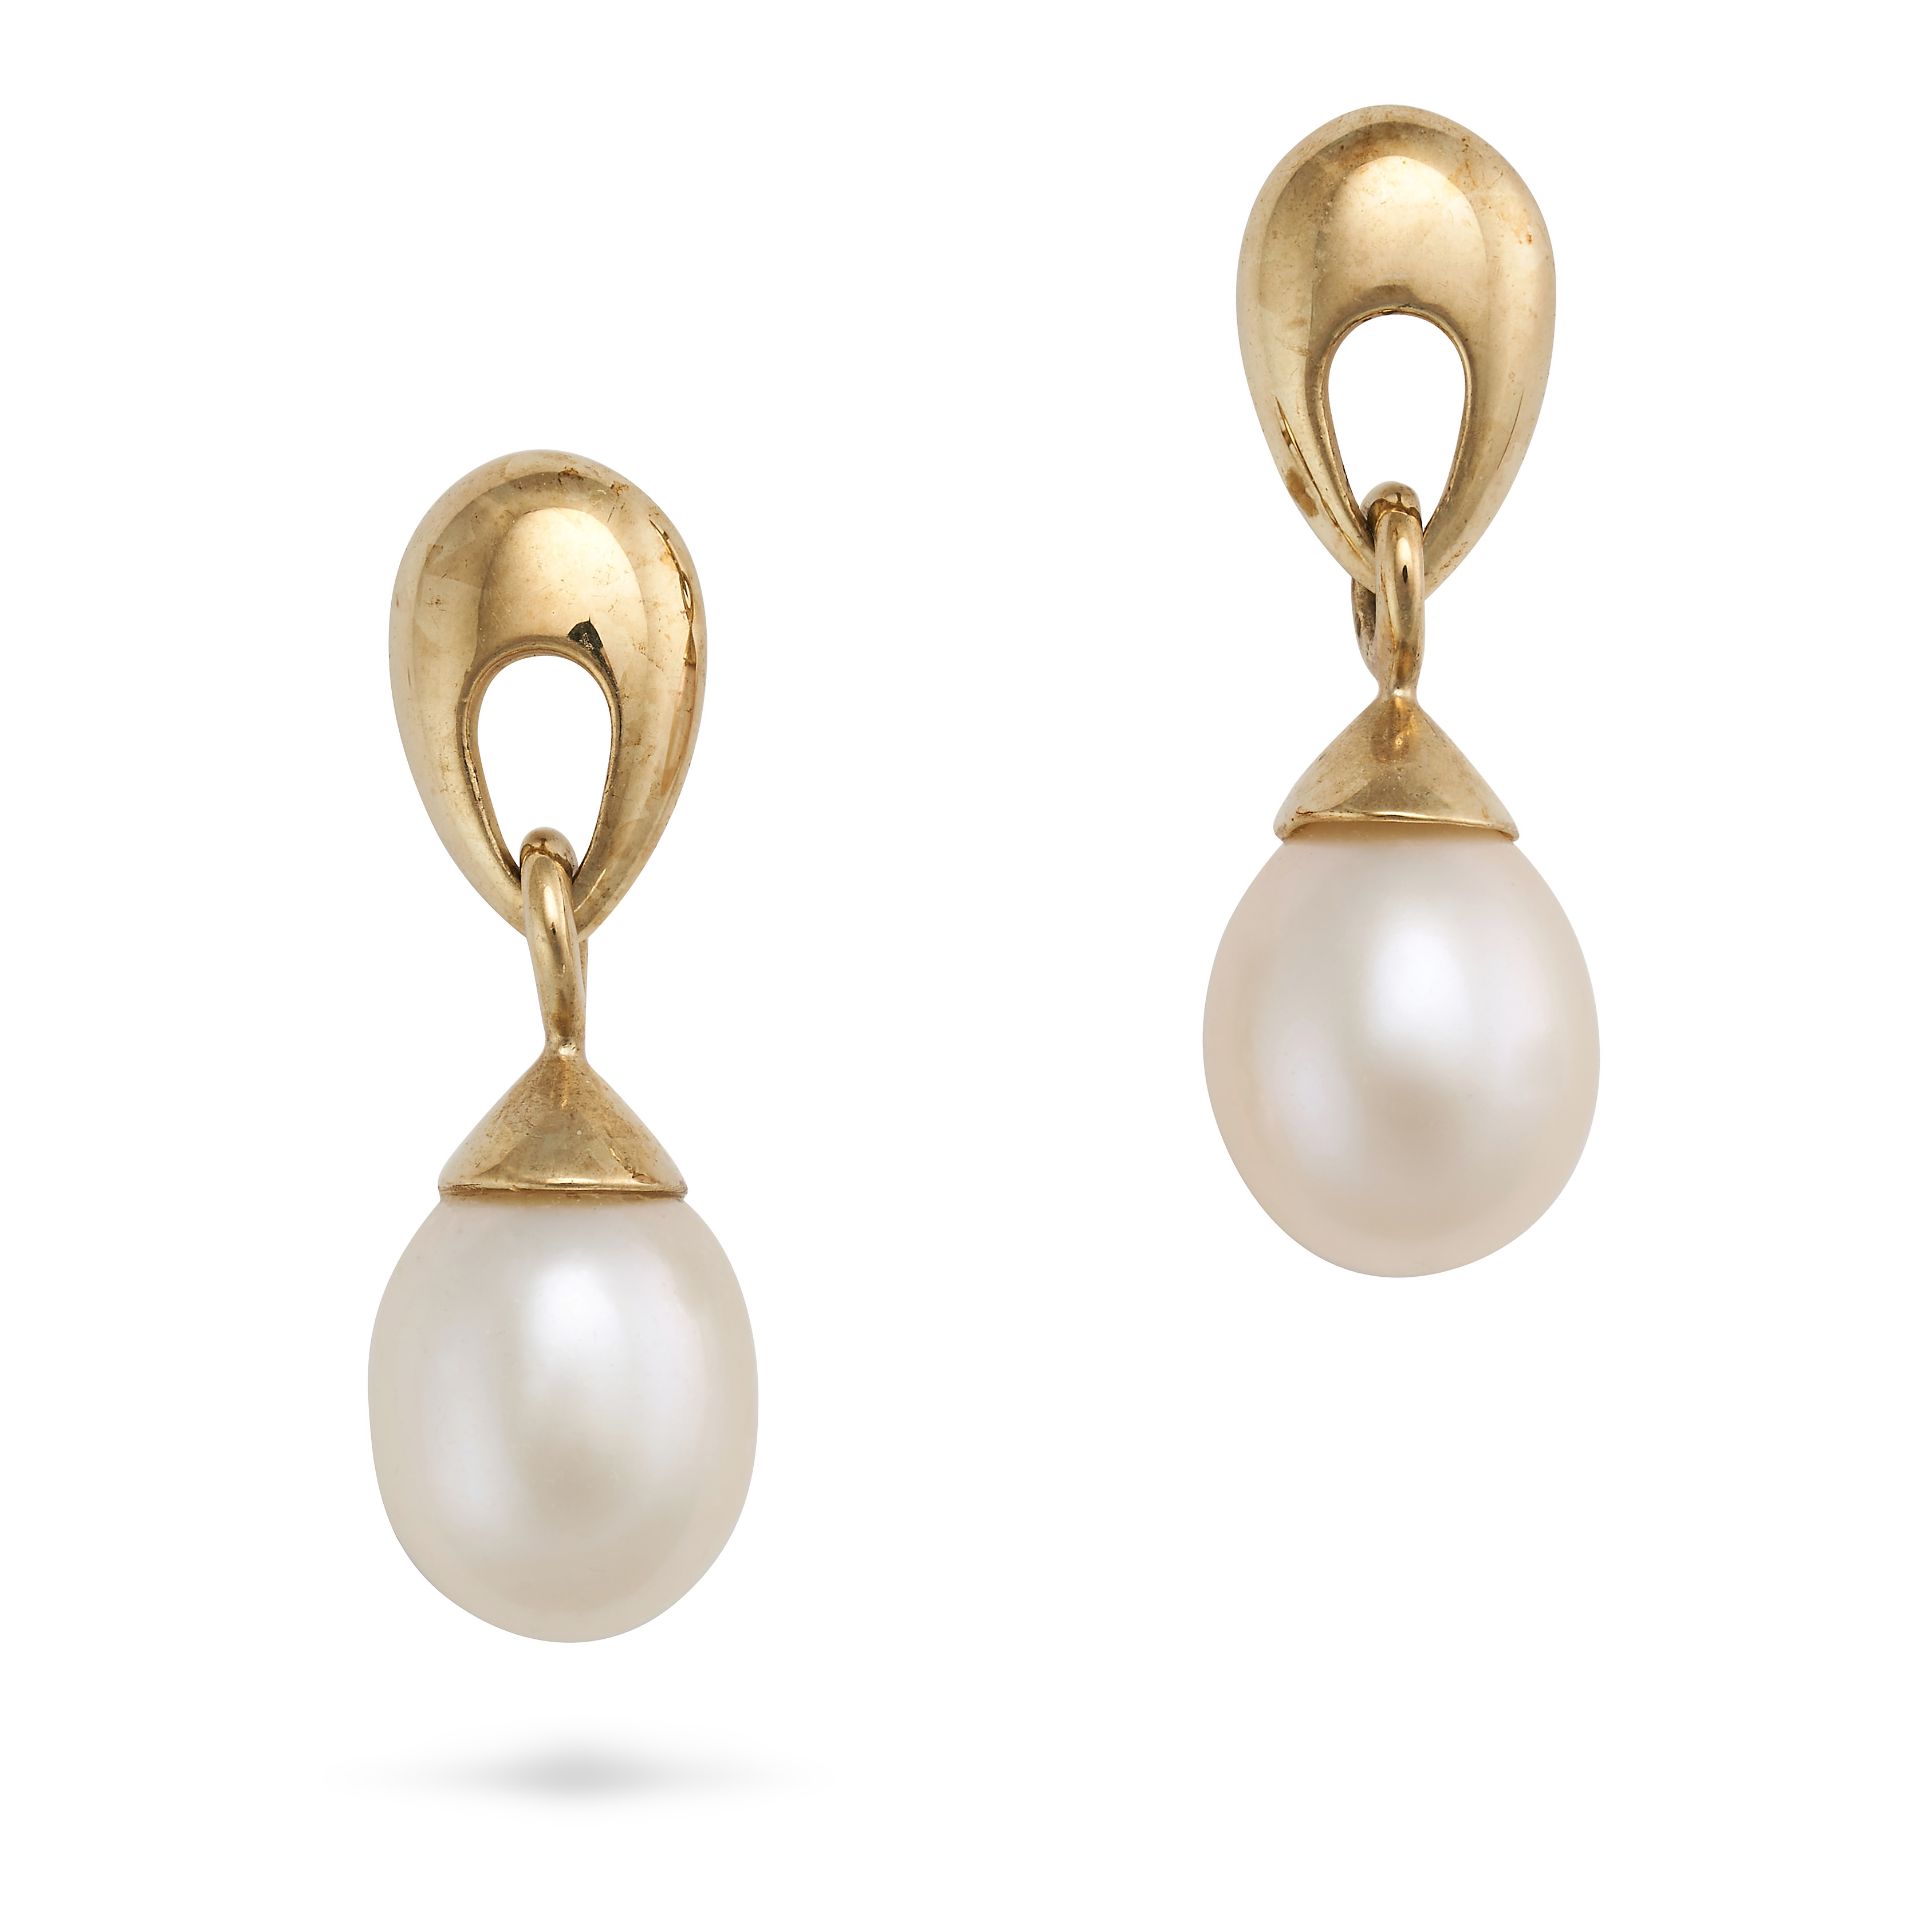 NO RESERVE - A PAIR OF PEARL DROP EARRINGS in 9ct yellow gold, each comprising a gold disc suspen...